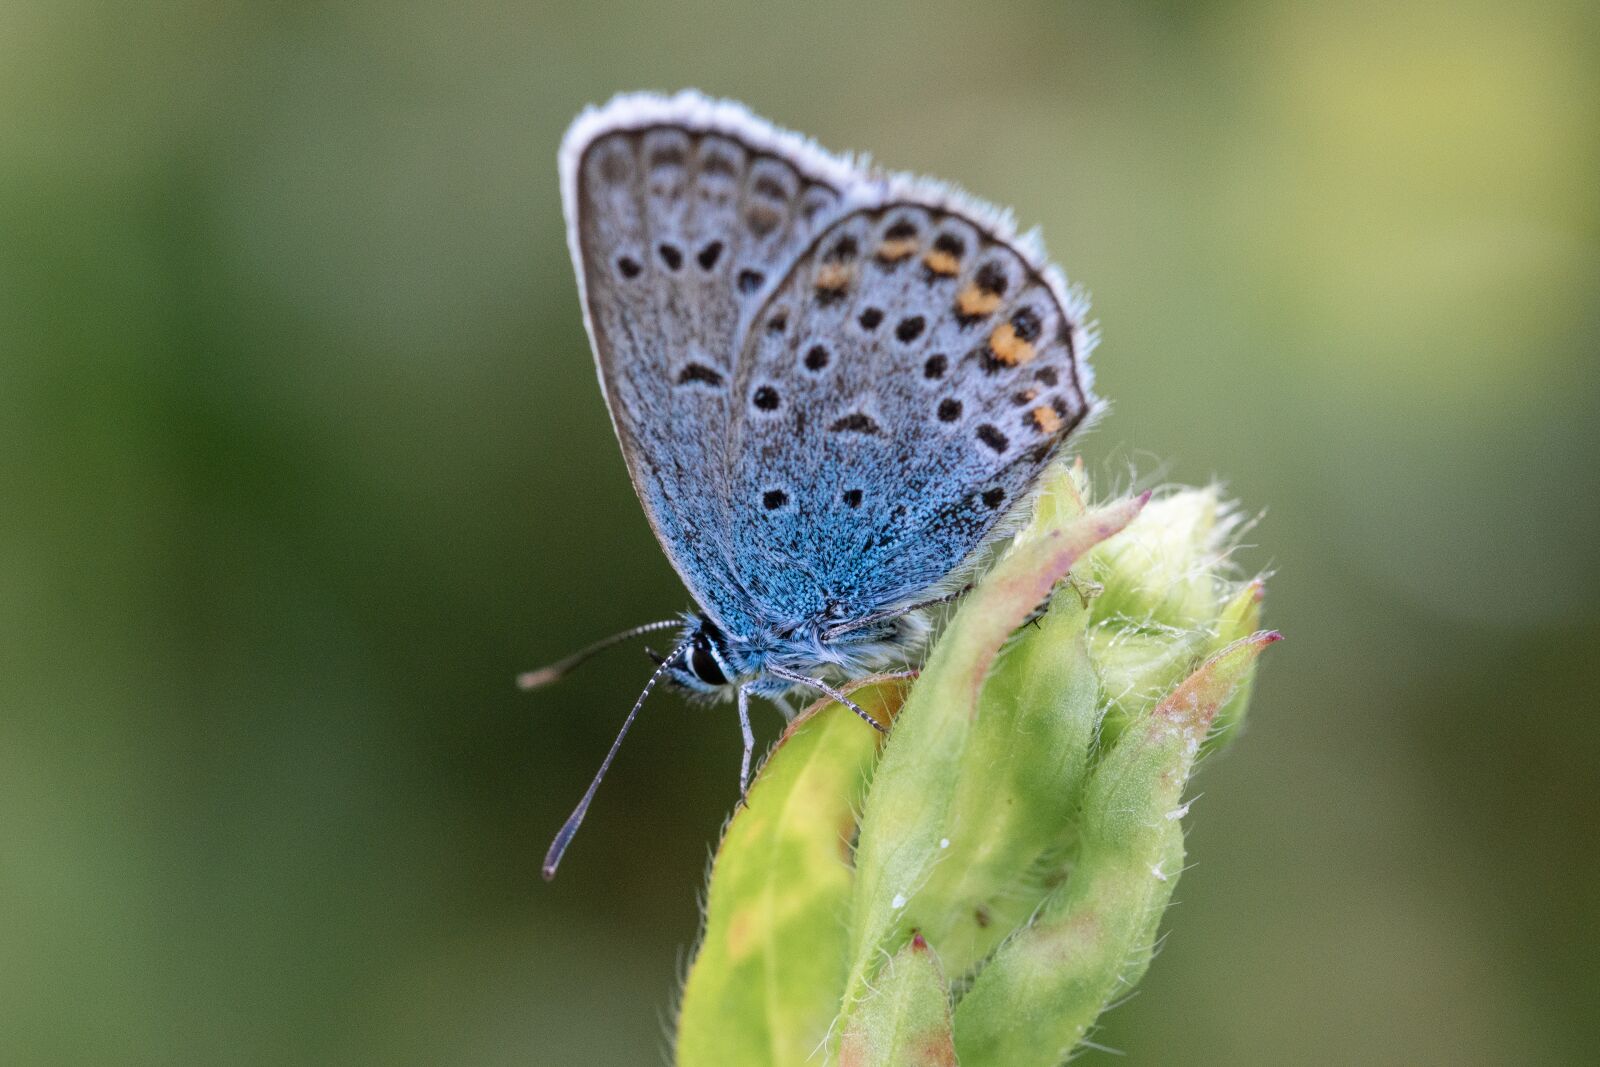 Tamron SP 90mm F2.8 Di VC USD 1:1 Macro (F004) sample photo. Butterfly, blue, nature photography